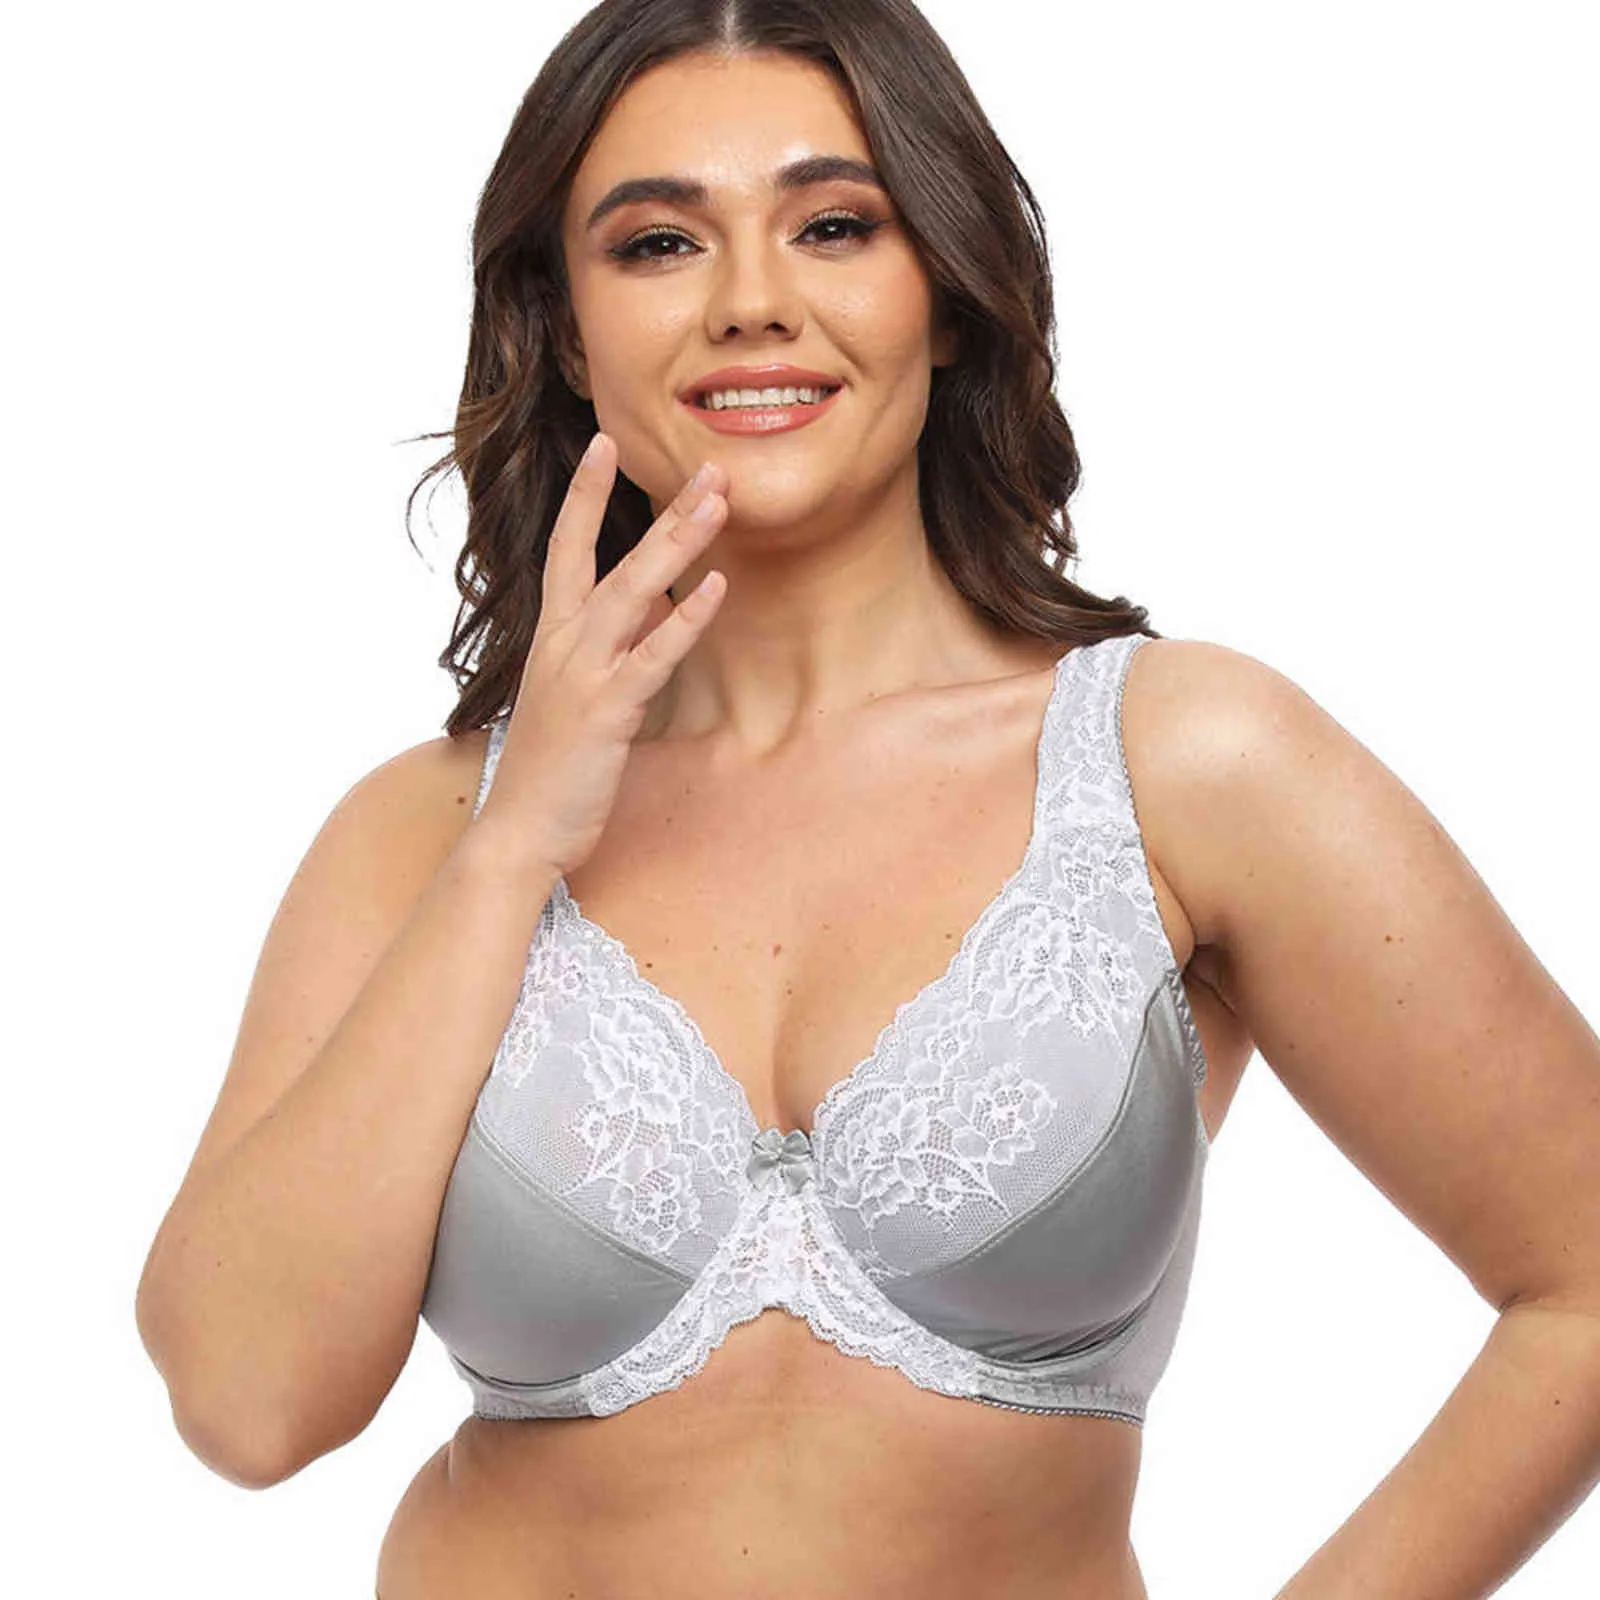 Gray Lace Perspective Bra Women Sexy Lingerie Embroidery Floral Bralette  Plus Size F G H I 34 36 38 40 42 44 48 50 52 54 211110 From 10,71 €